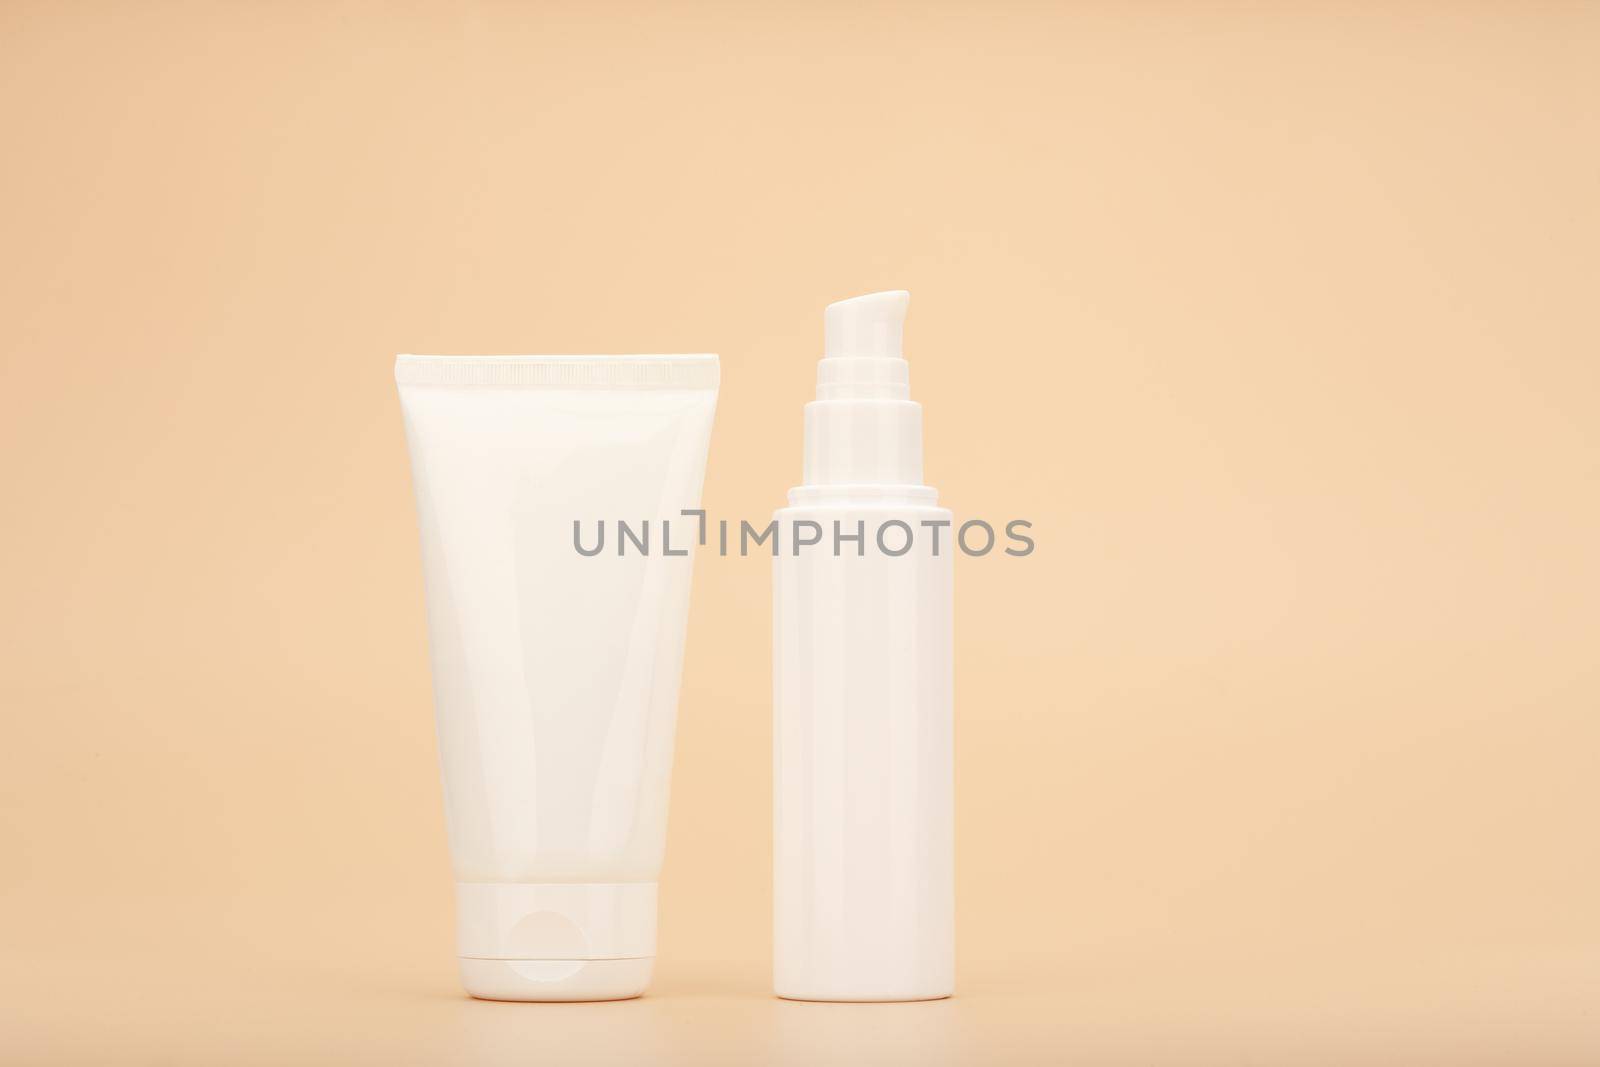 Moisturizing care for face and hands skin. Concept of skin care and beauty. Cream tubes against beige background with copy space. High quality photo